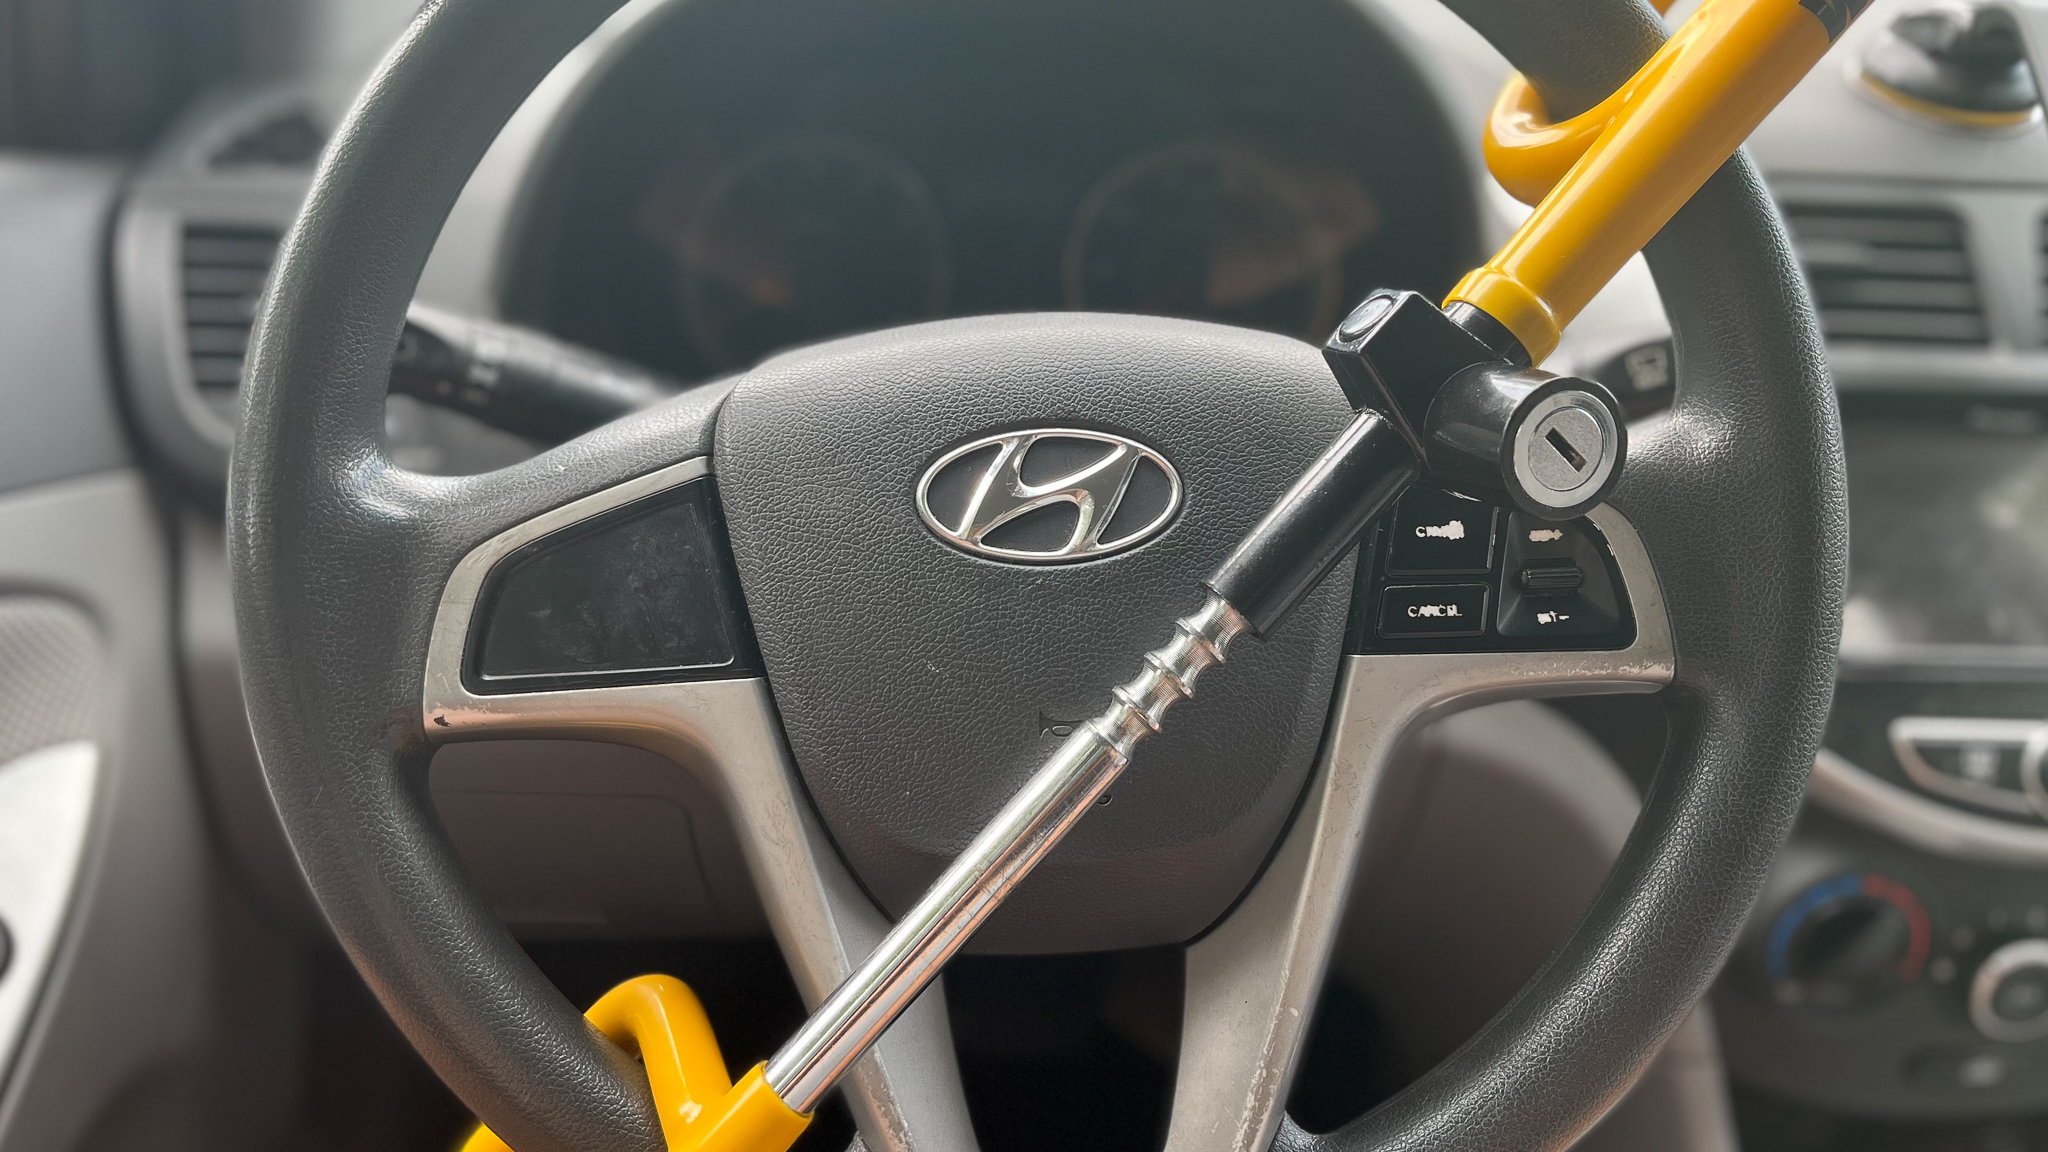 Drive a Newer Hyundai or Kia? A Steering Wheel Keep It From Getting Stolen